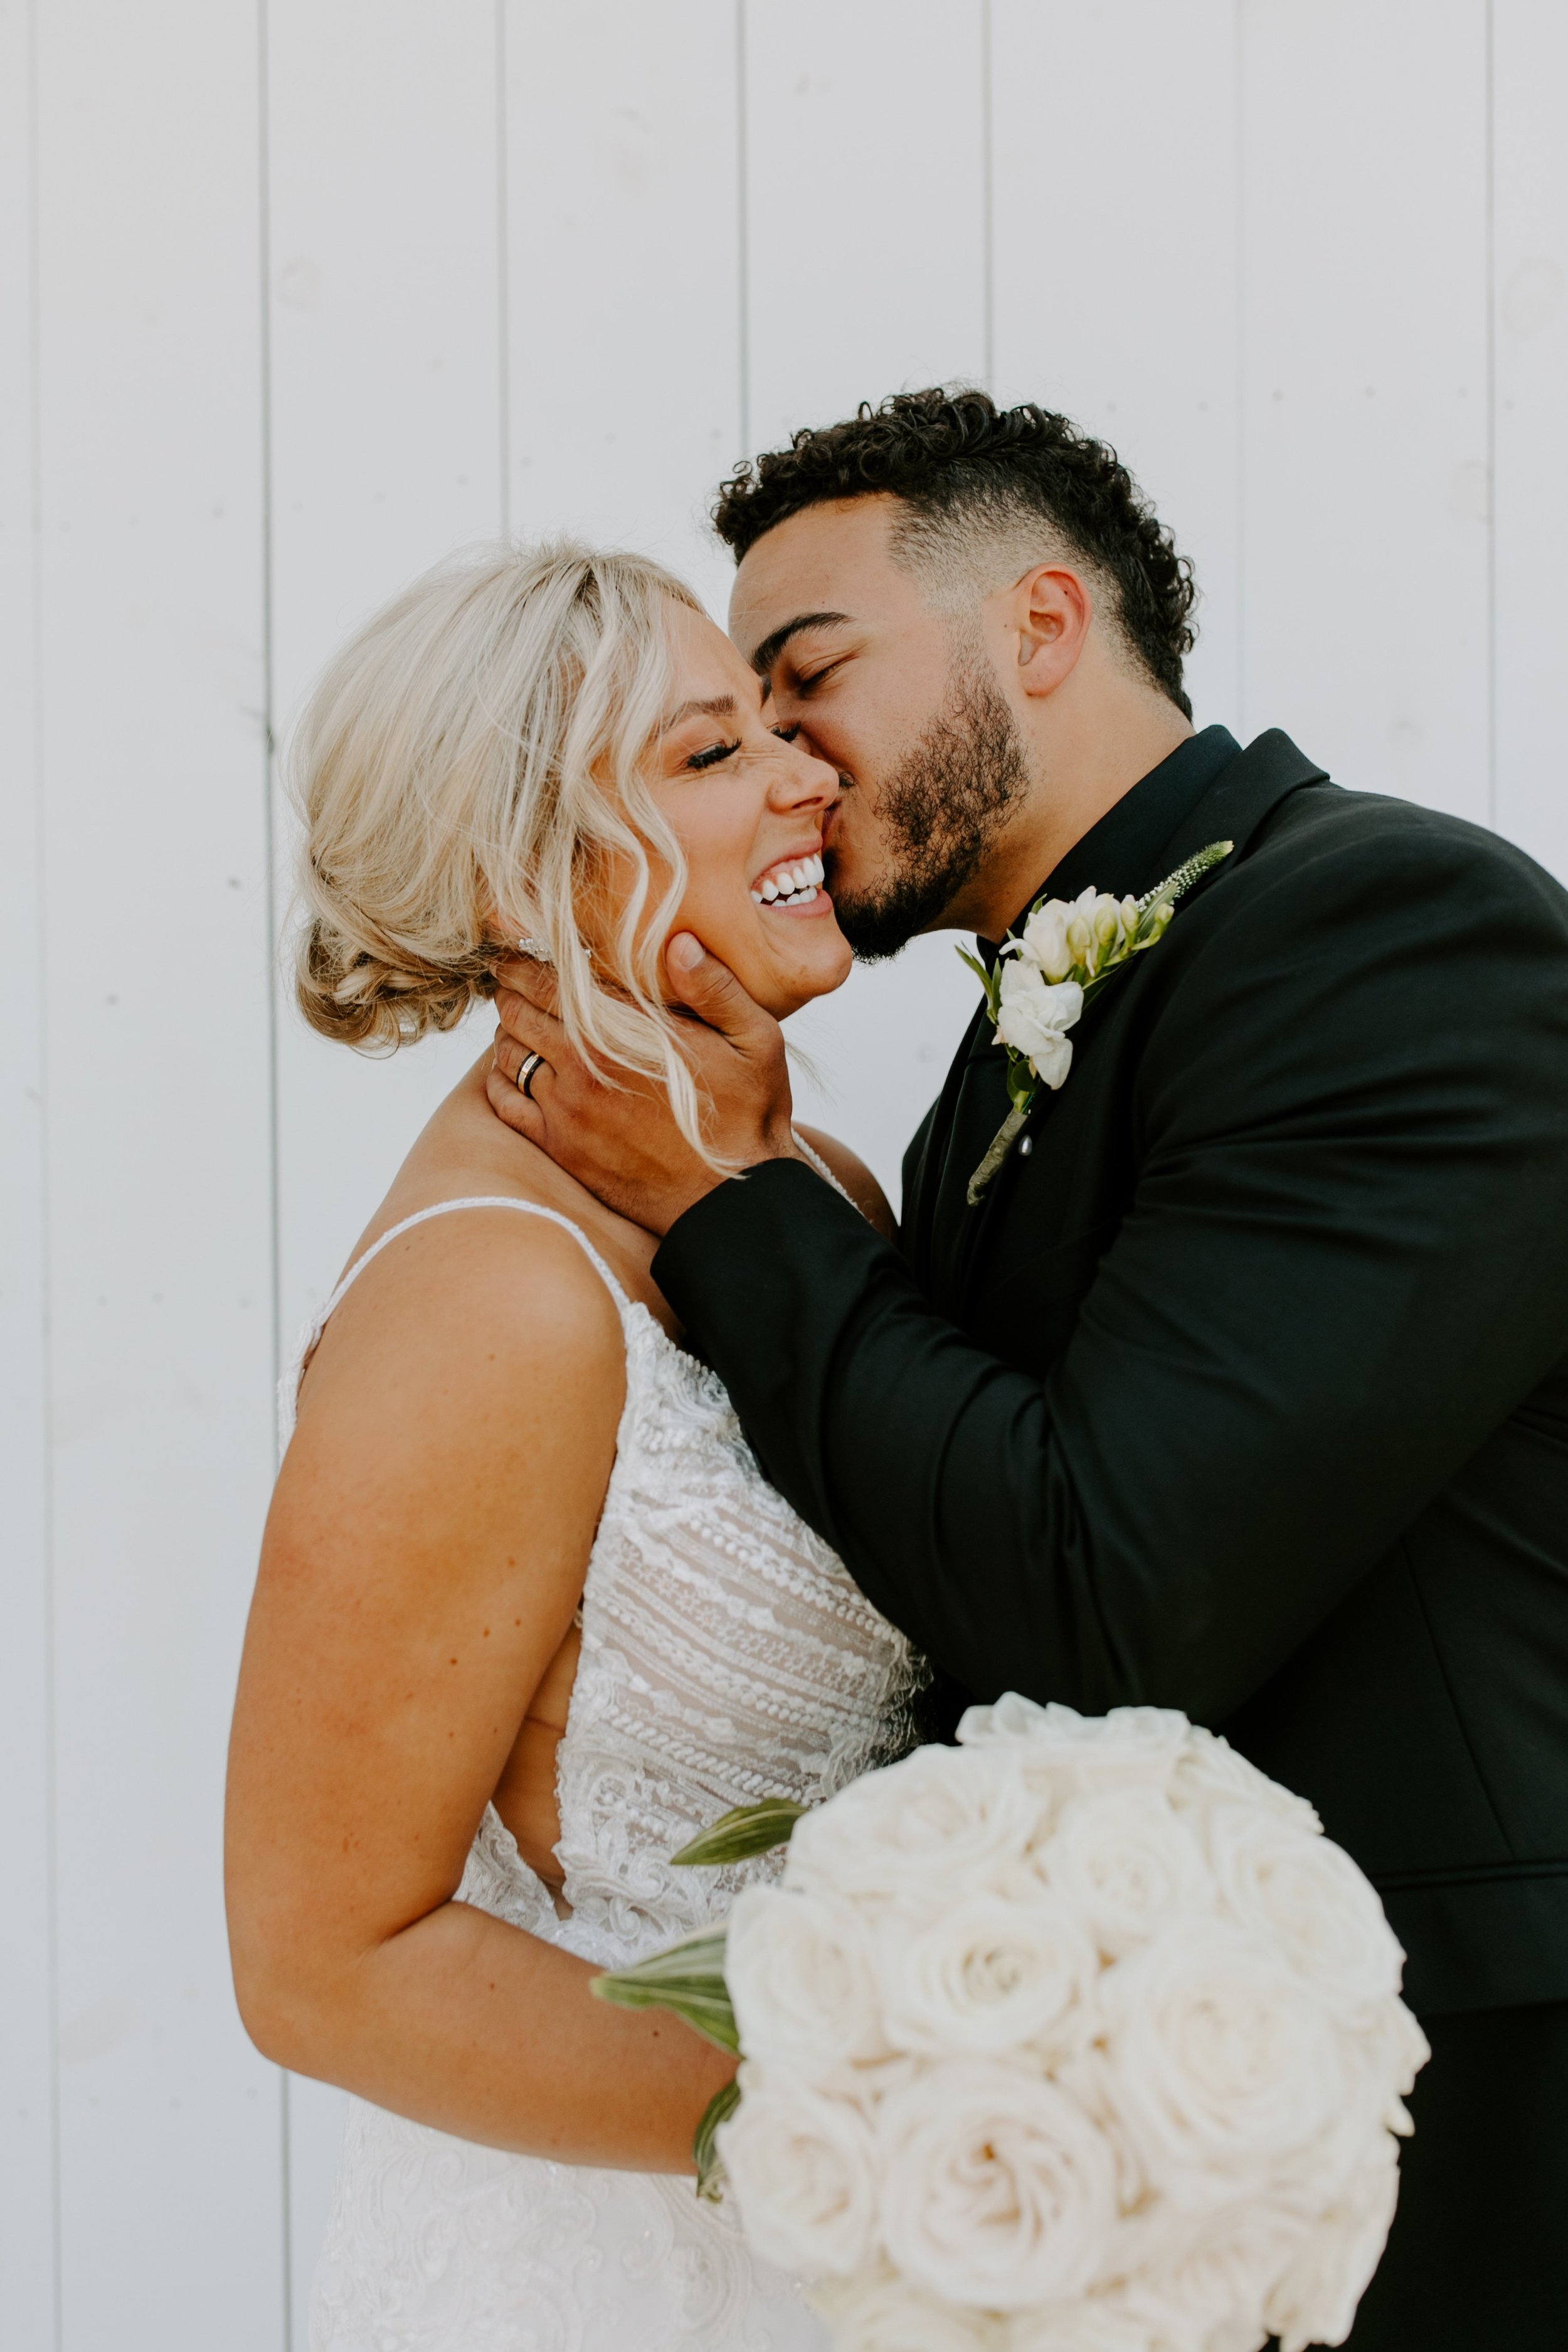  “If there is one piece of advice I could give to a bride/groom, it would be to hire a wedding planner. Specifically, HappiLily Events (obviously!!).  When I think back to our wedding day, there is nothing that comes to mind that I wish would have go